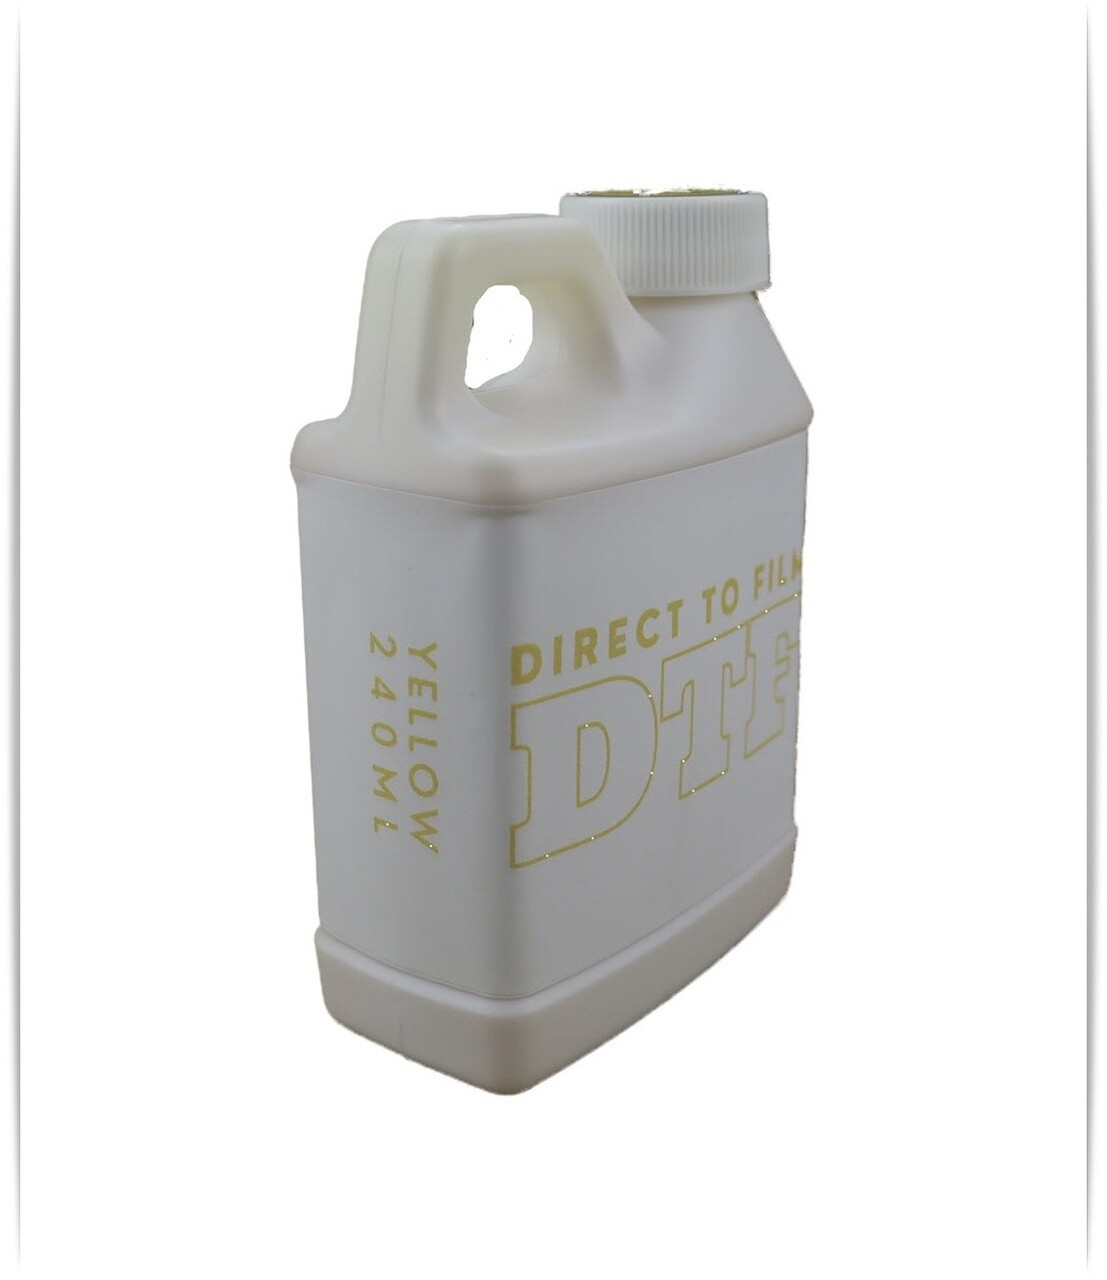 Yellow DTF Ink Direct To Film 240ml Bottle for Epson, Epson Print Head printers